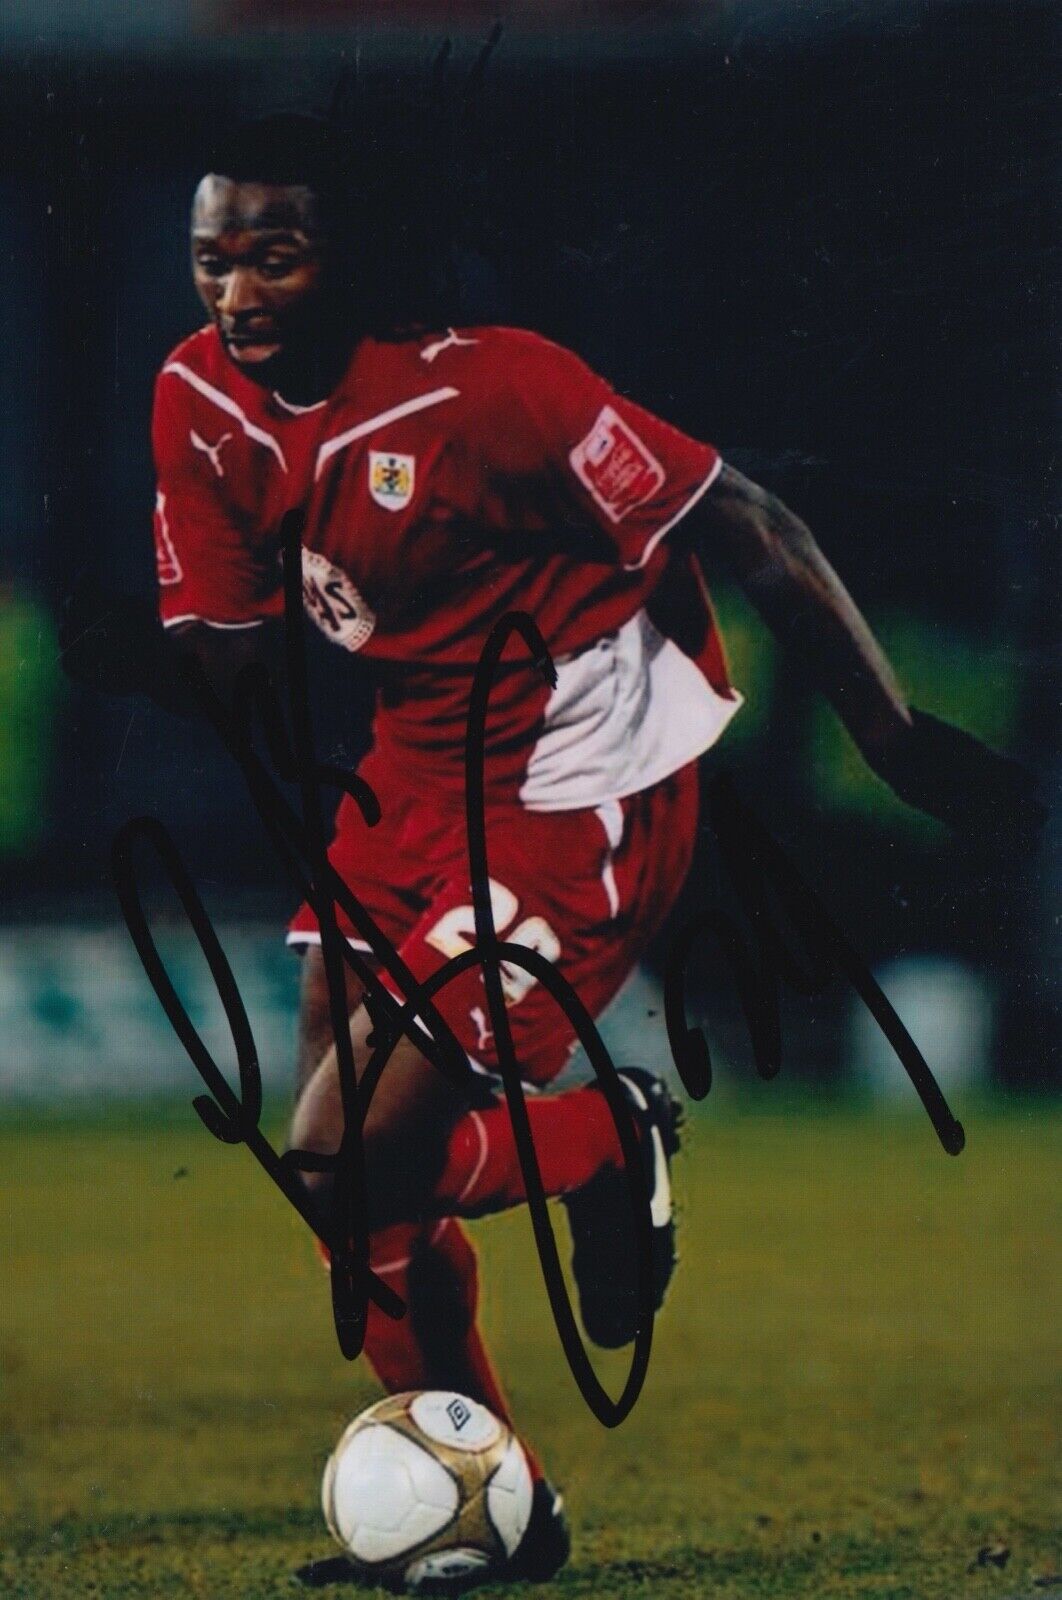 EVANDER SNO HAND SIGNED 6X4 Photo Poster painting - FOOTBALL AUTOGRAPH - BRISTOL CITY 5.